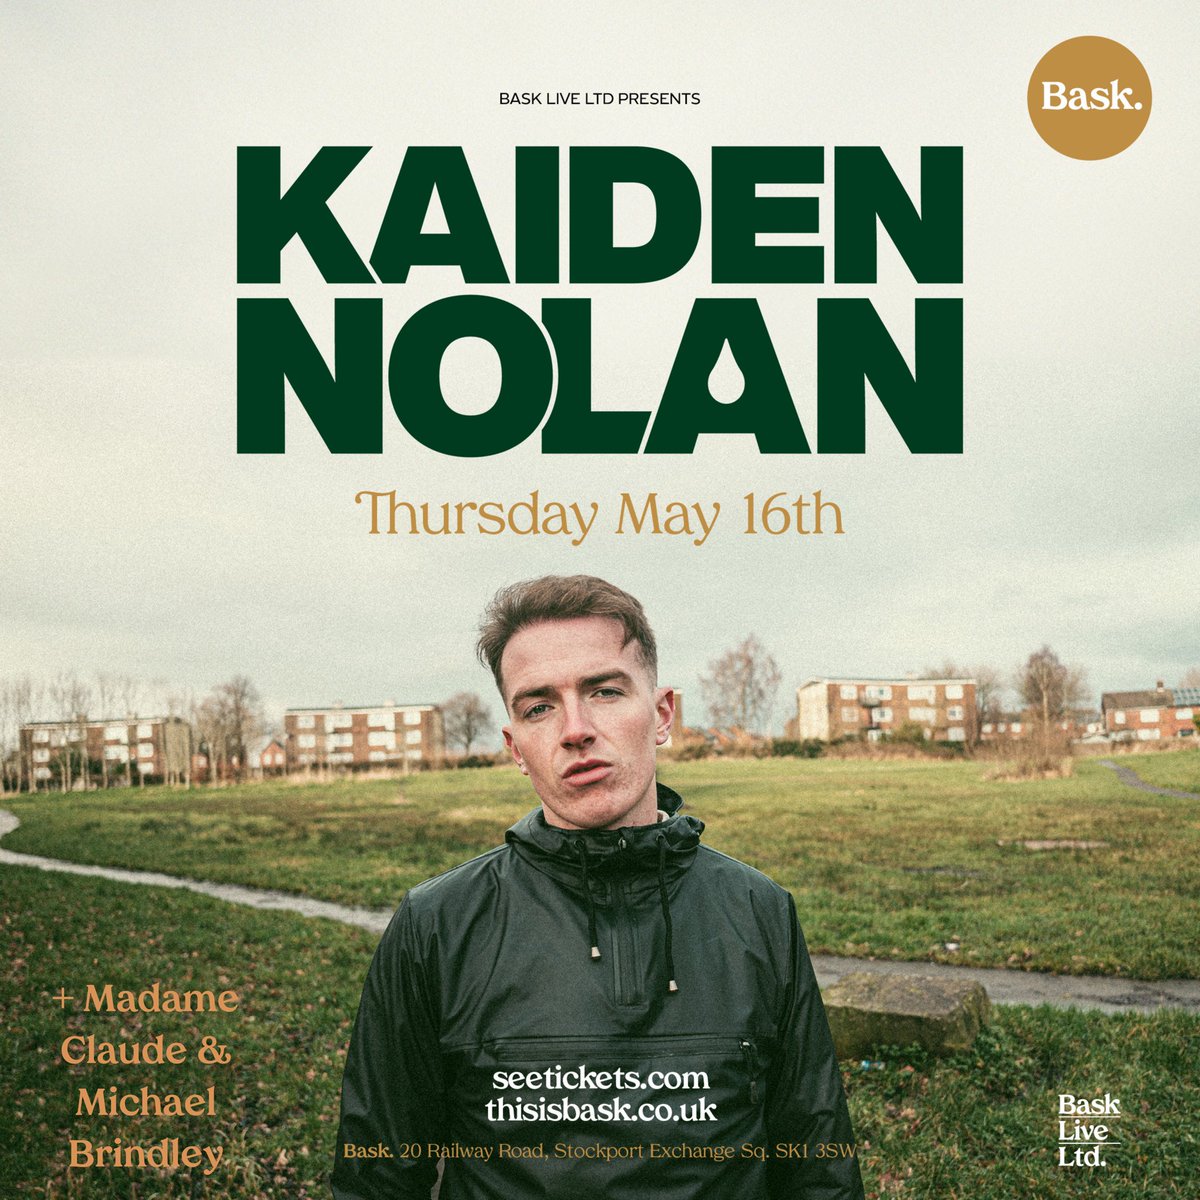 TONIGHT! The incredible @KaidenNolan takes to the stage alongside Madame Claude + Michael Brindley. Doors 7.30. Tickets > seetickets.com/event/kaiden-n…